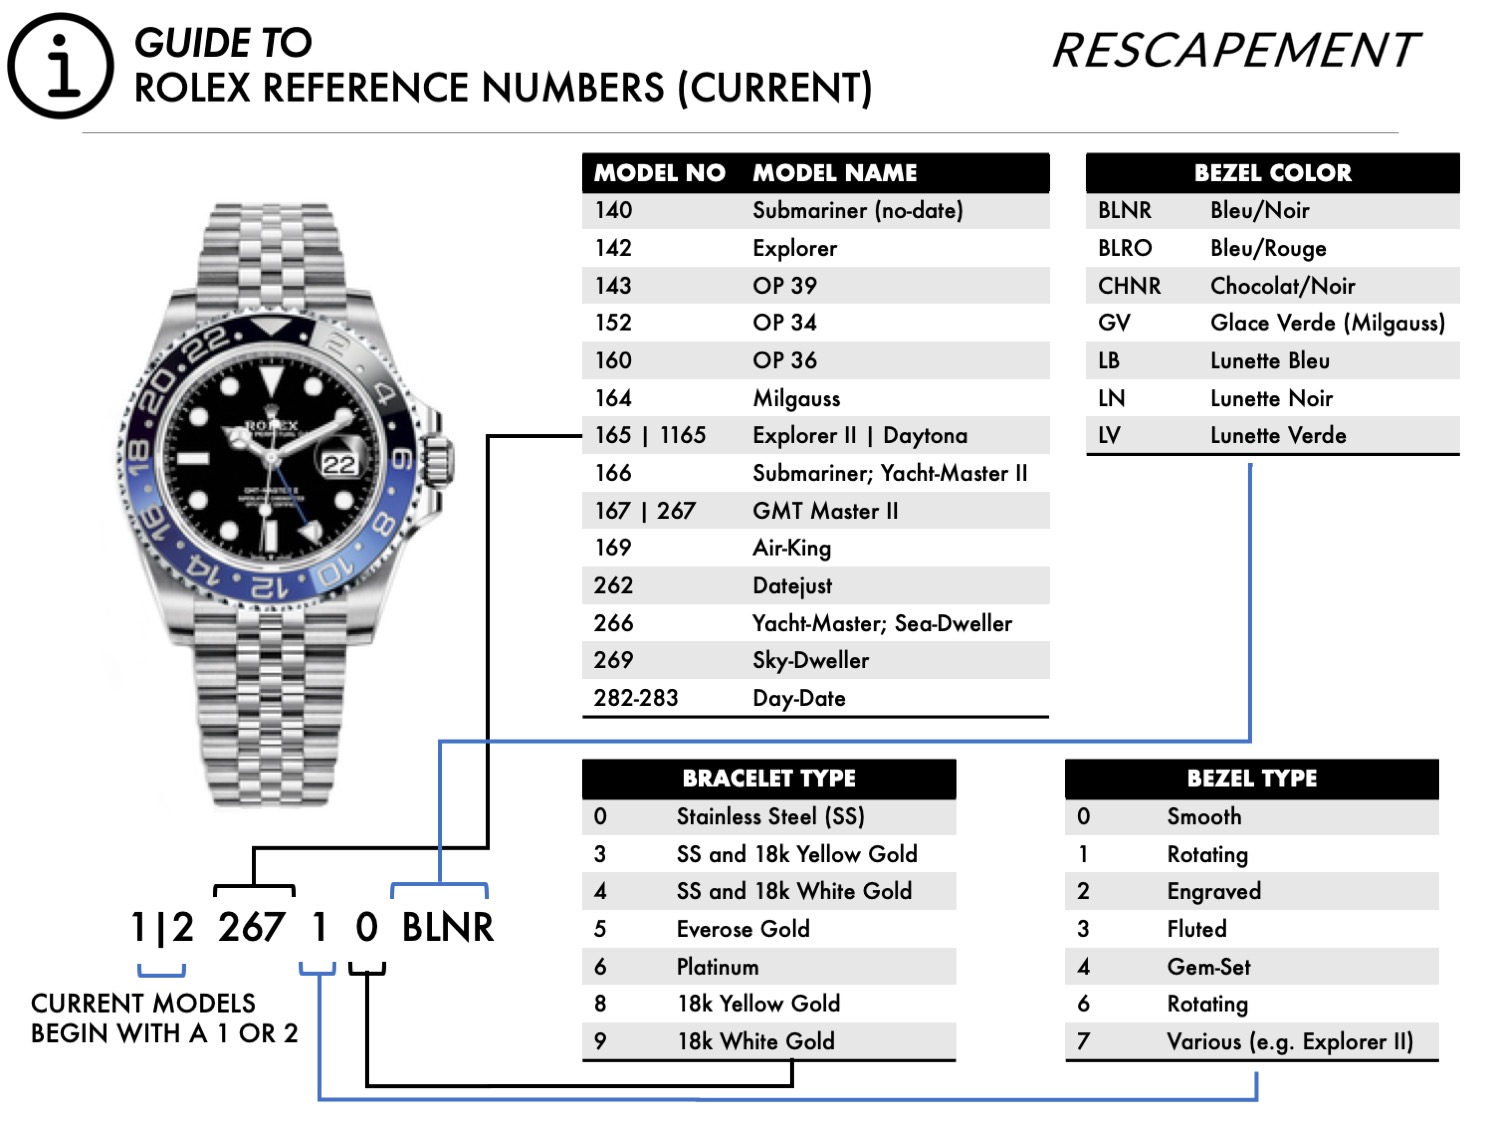 rolex style number